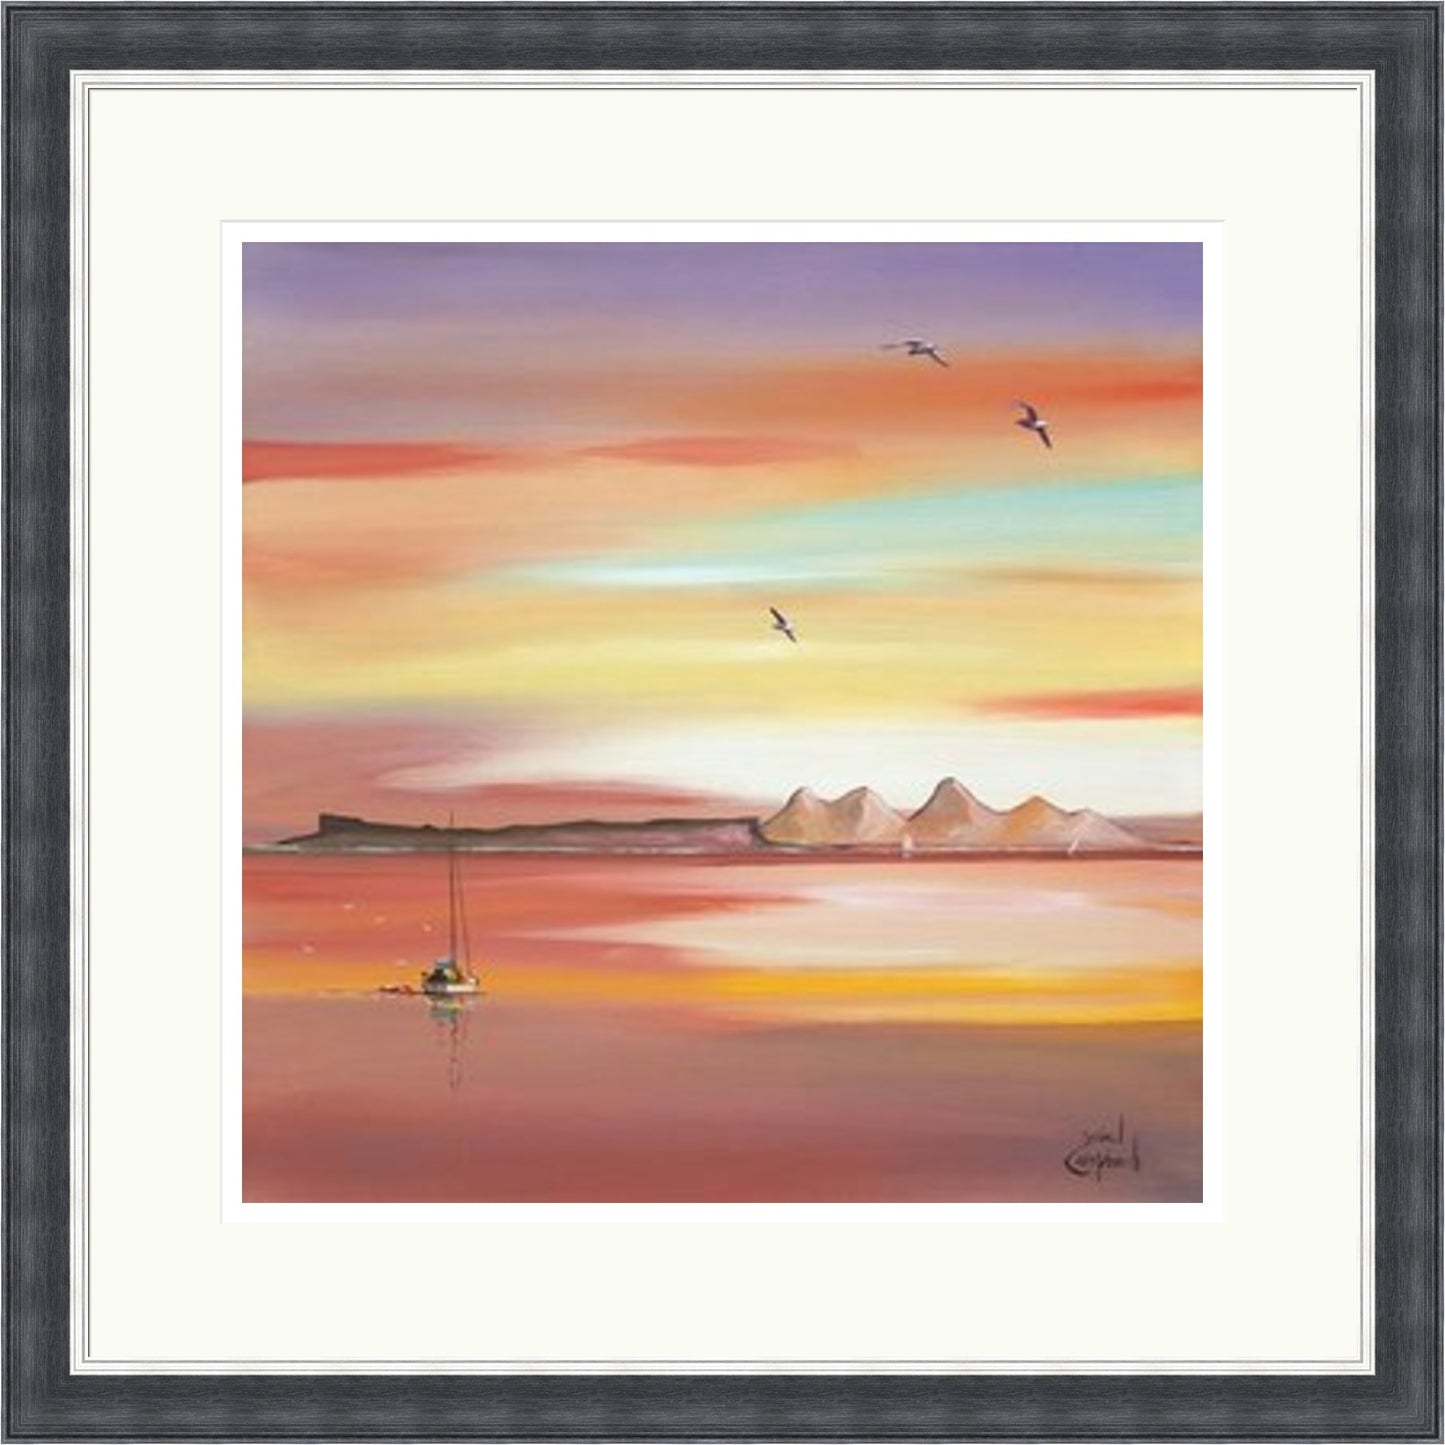 Evening Glow Arisaig by Daniel Campbell